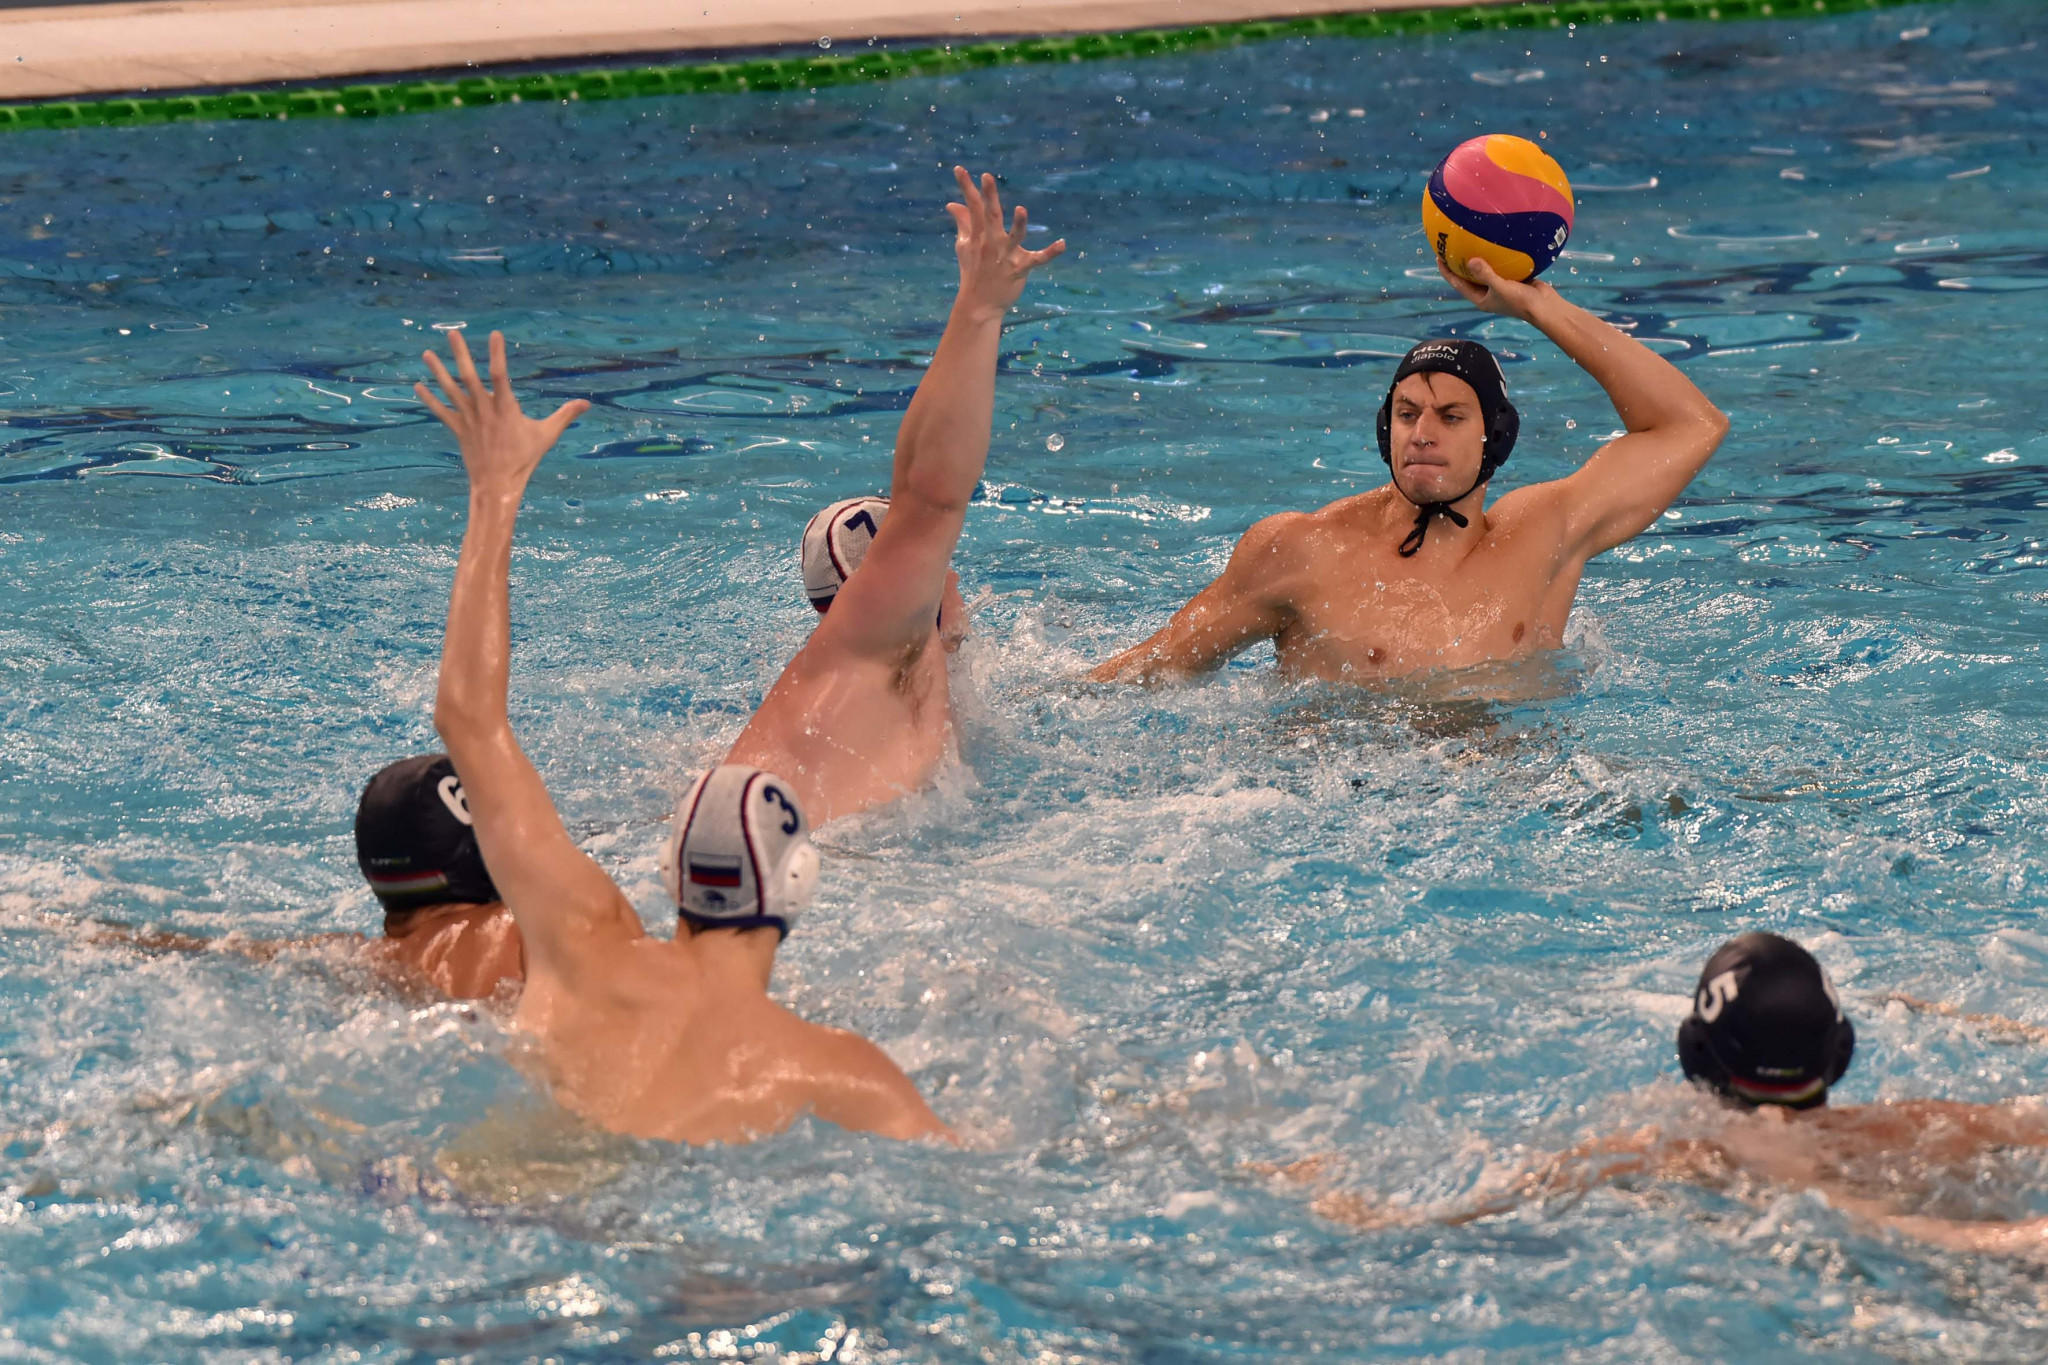 Hosts finish Naples 2019 on a high with water polo victory